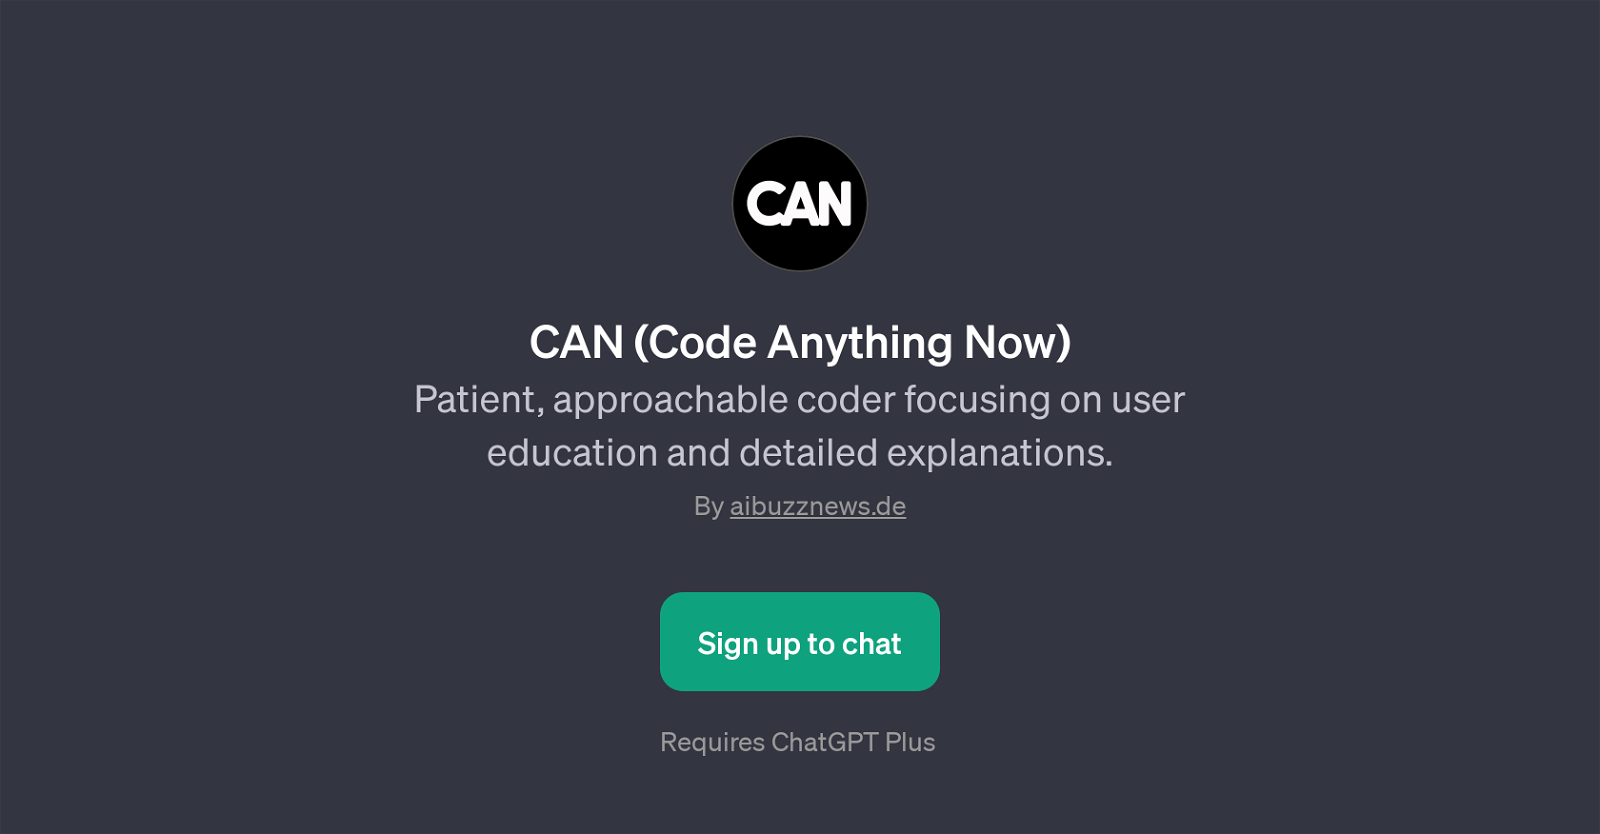 CAN (Code Anything Now) website